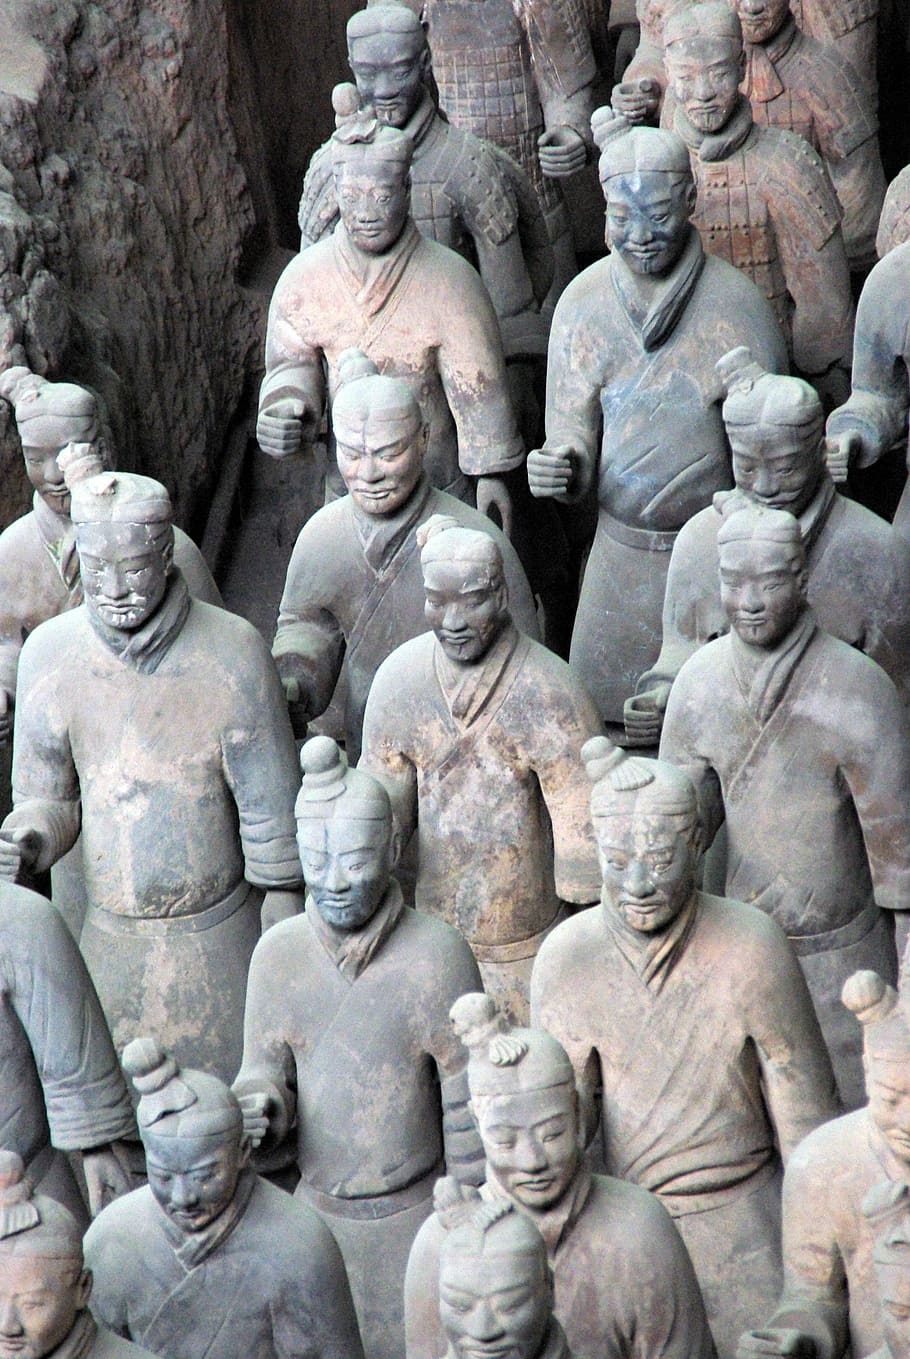 china, xian, soldier, army, terracotta, antique, terracotta army, xi'an, world heritage of humanity, statue